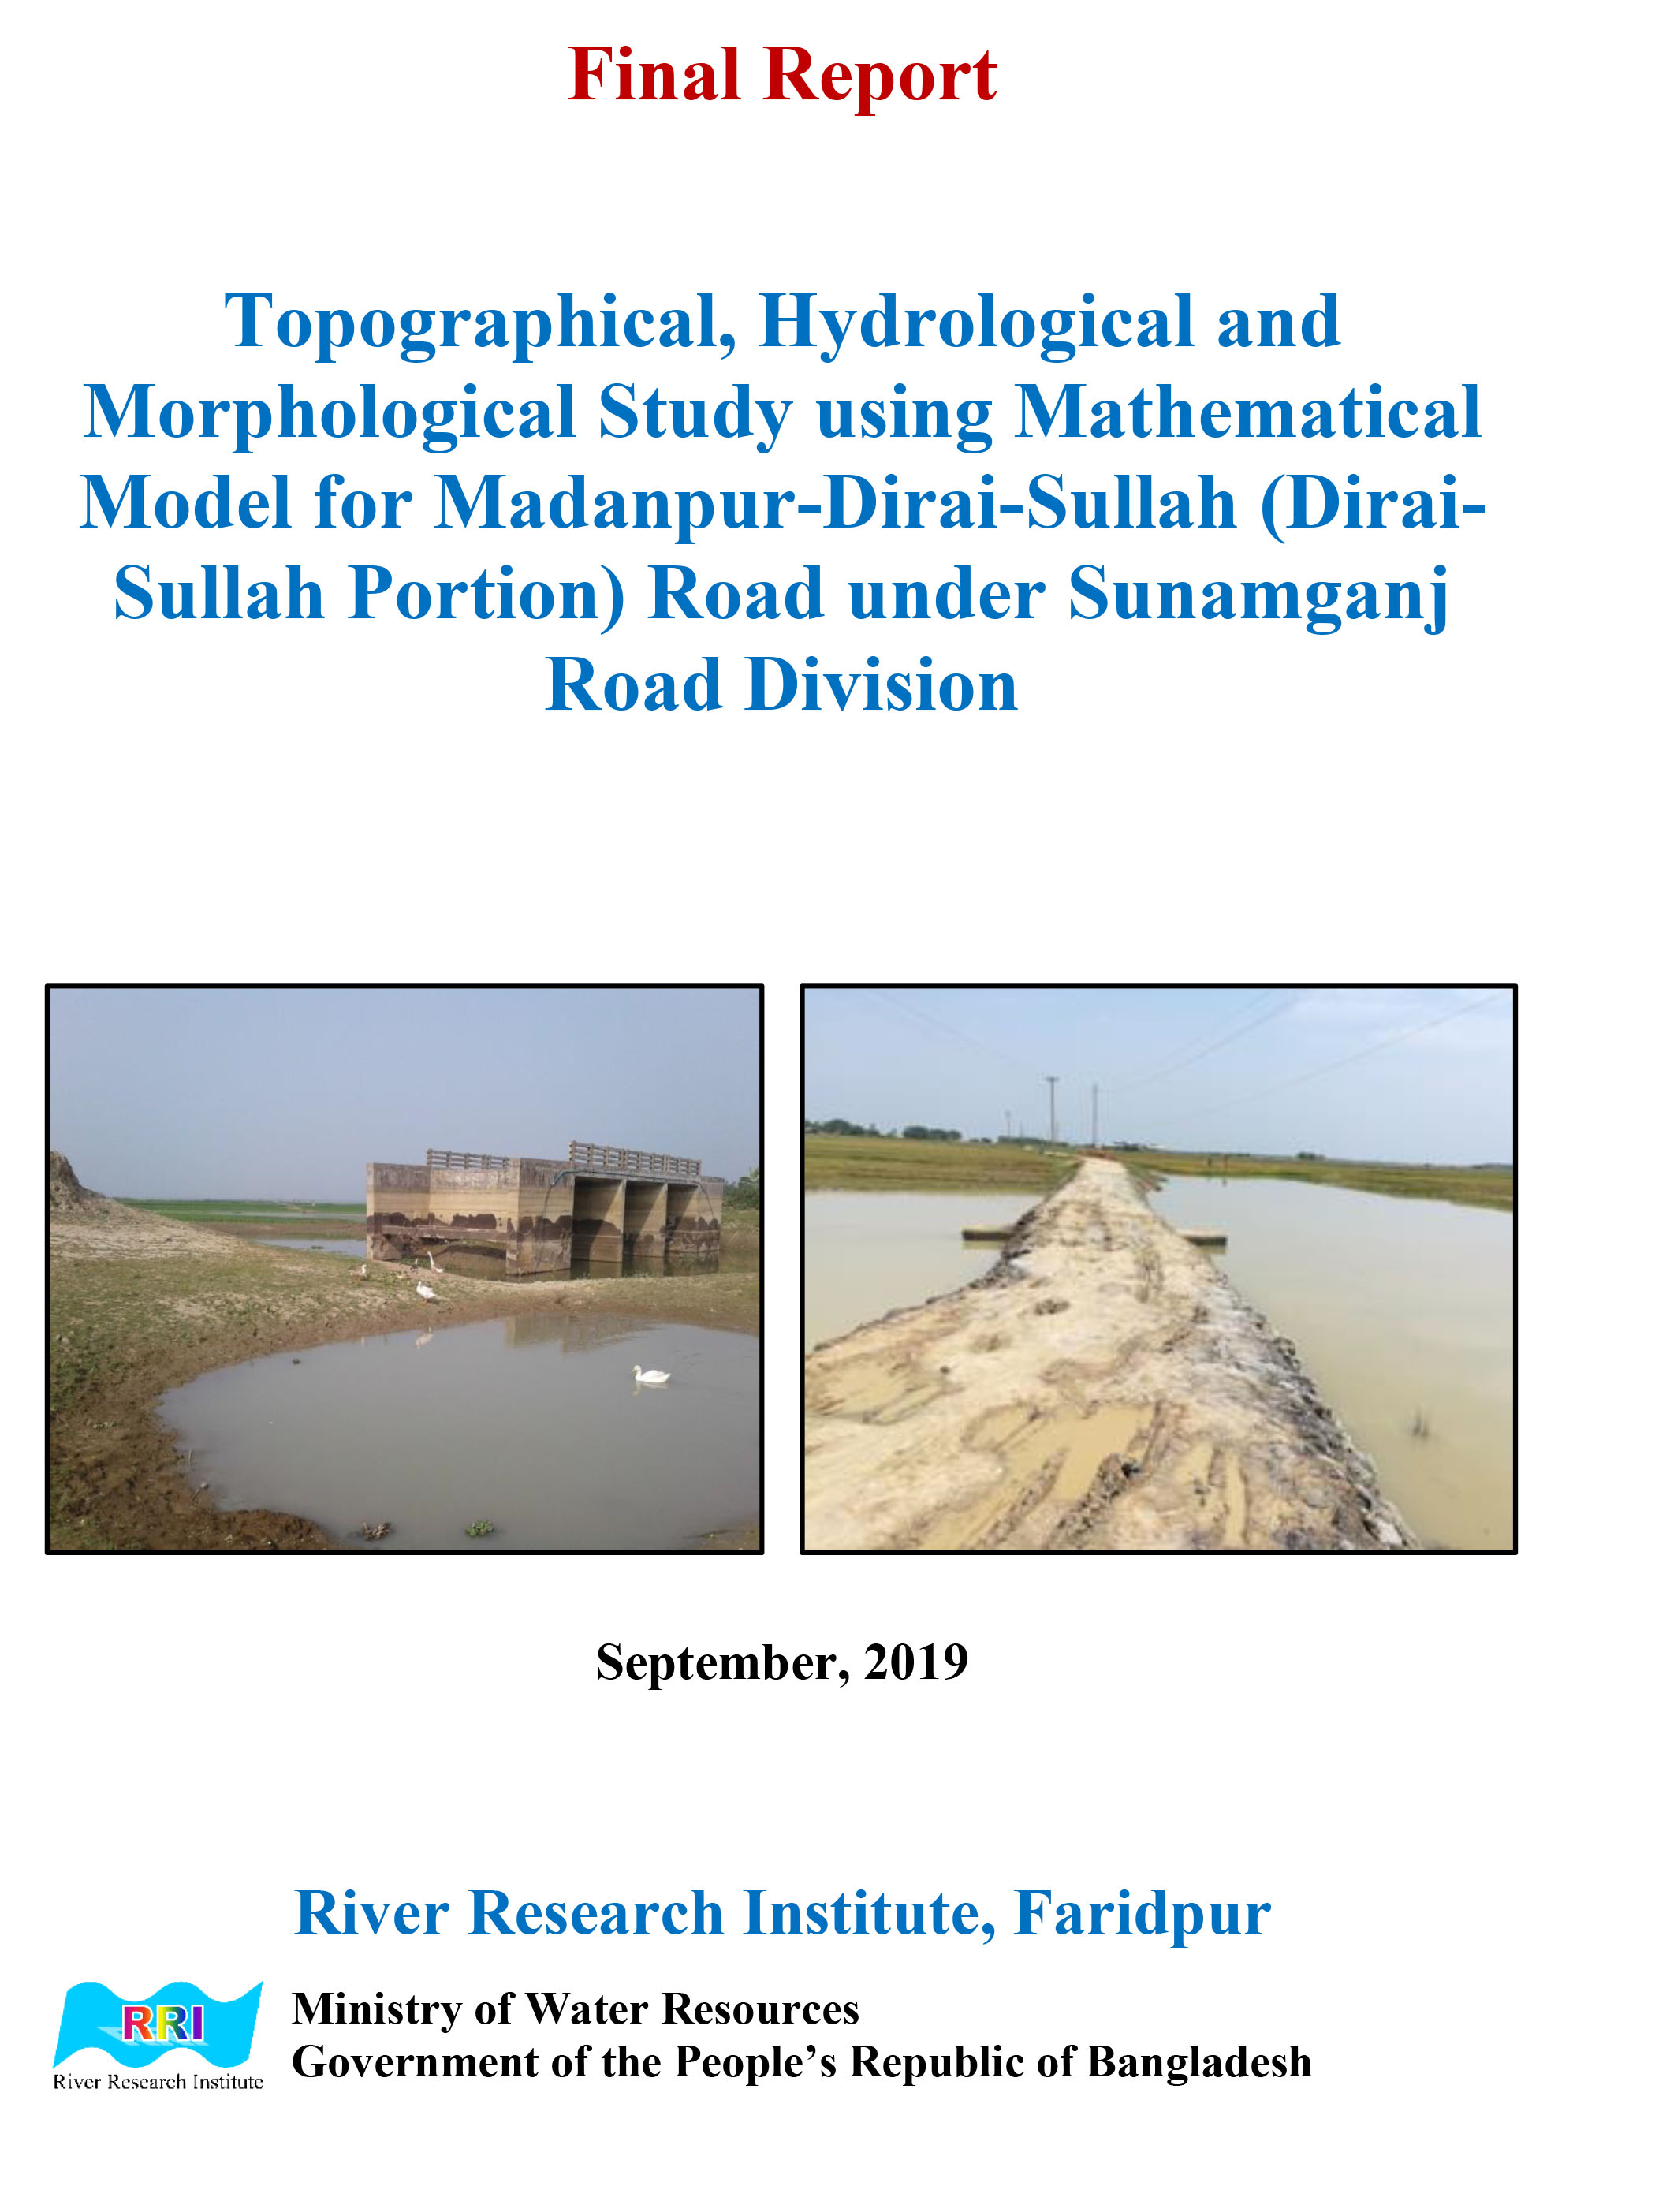 Topographical, Hydrological And Morphological Study Using Mathematical Model For Madanpur-Dirai-Sullah (Dirai-Sullah Portion) Road Under Sunamganj Road Division